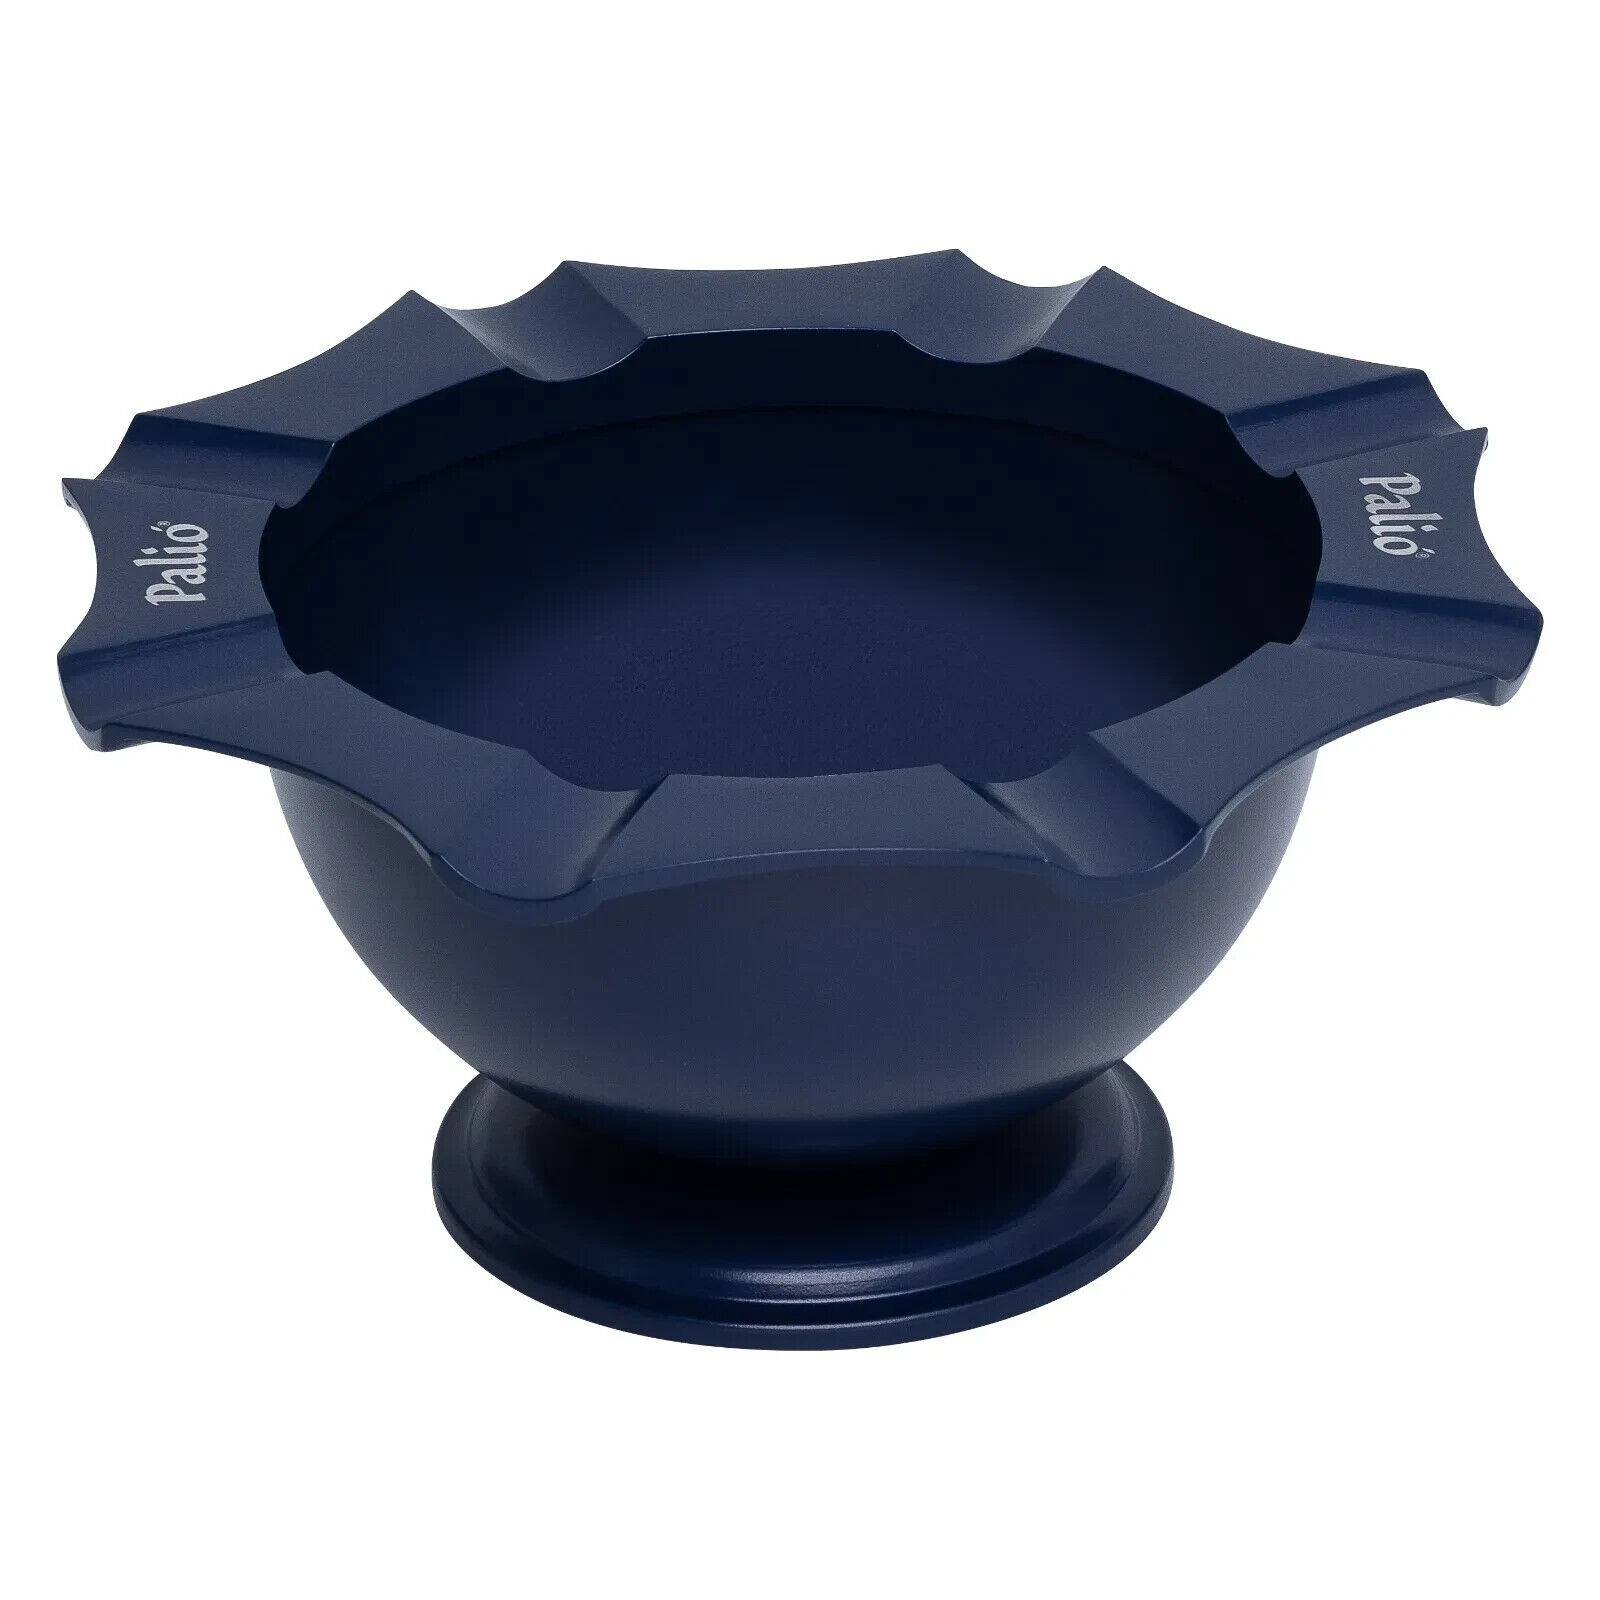 Palio Tazza Ashtray, Built in Cigar Rests, Matte Blue